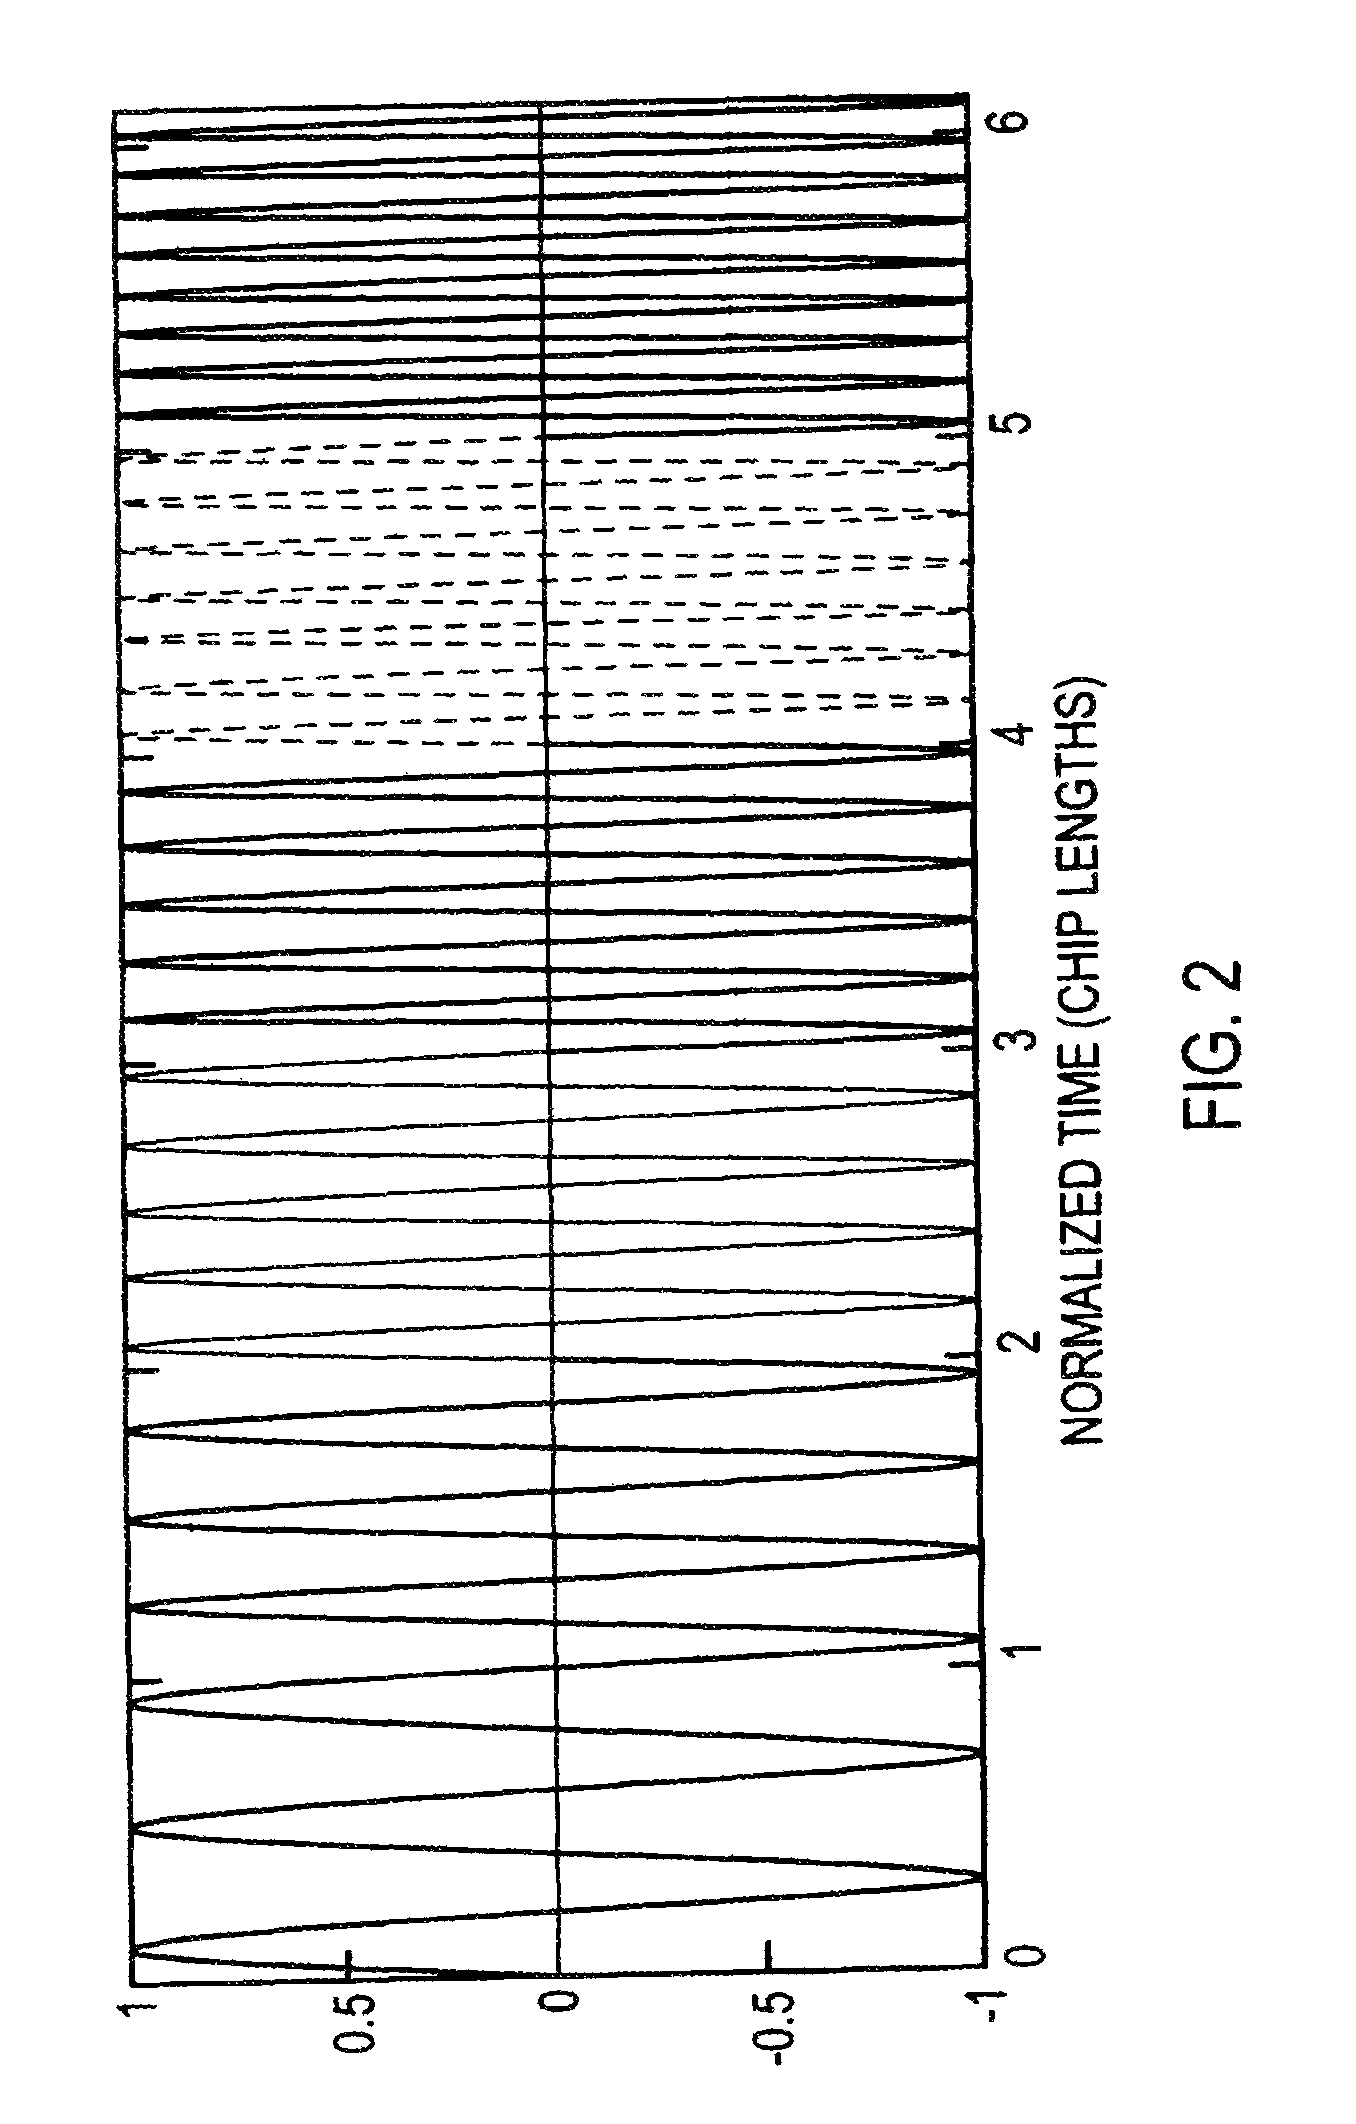 Surface acoustic wave coding for orthogonal frequency coded devices